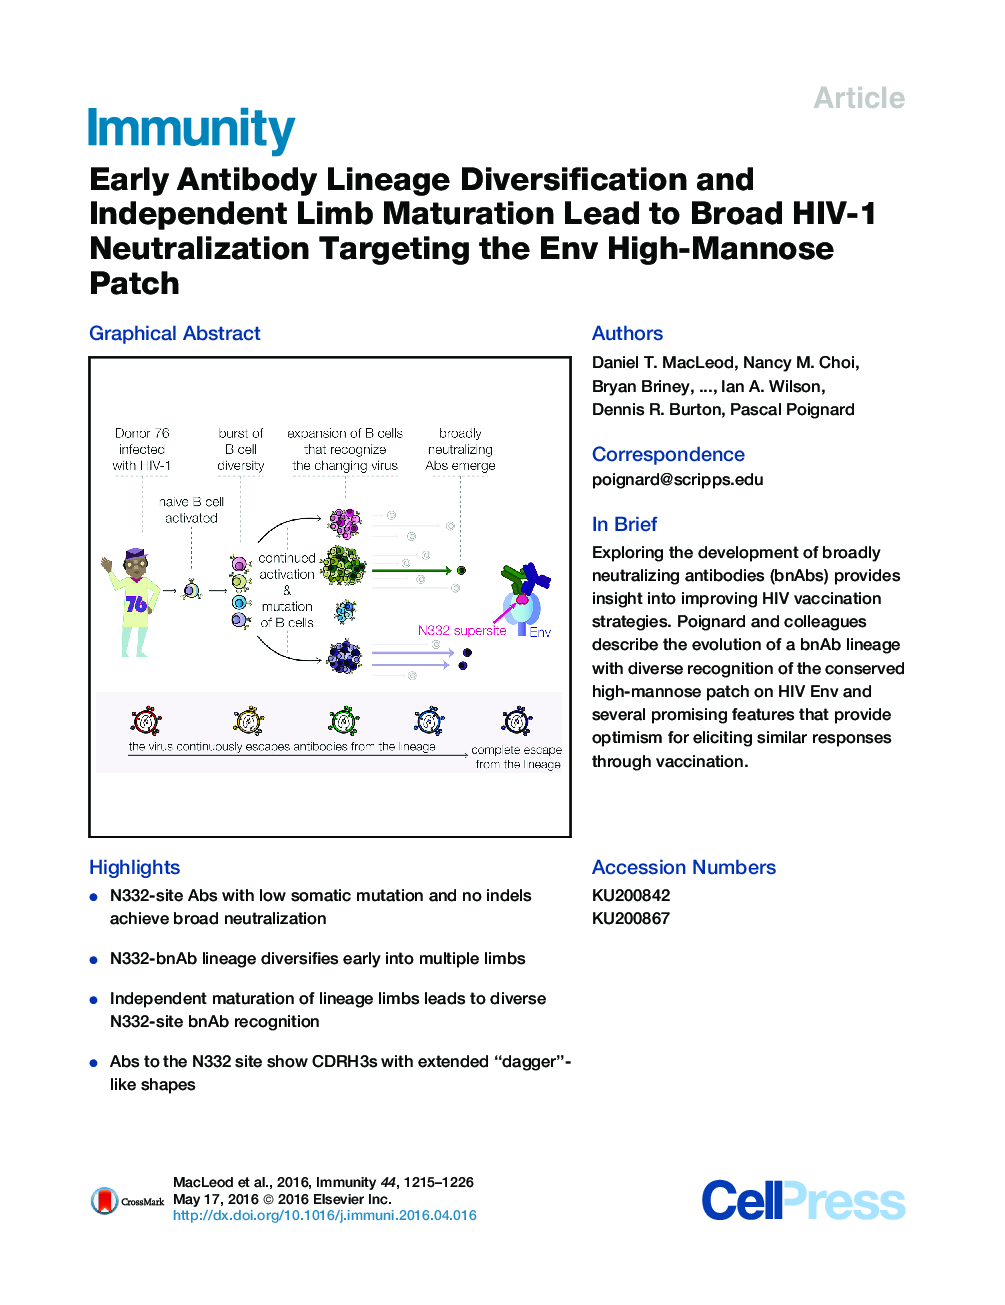 Early Antibody Lineage Diversification and Independent Limb Maturation Lead to Broad HIV-1 Neutralization Targeting the Env High-Mannose Patch